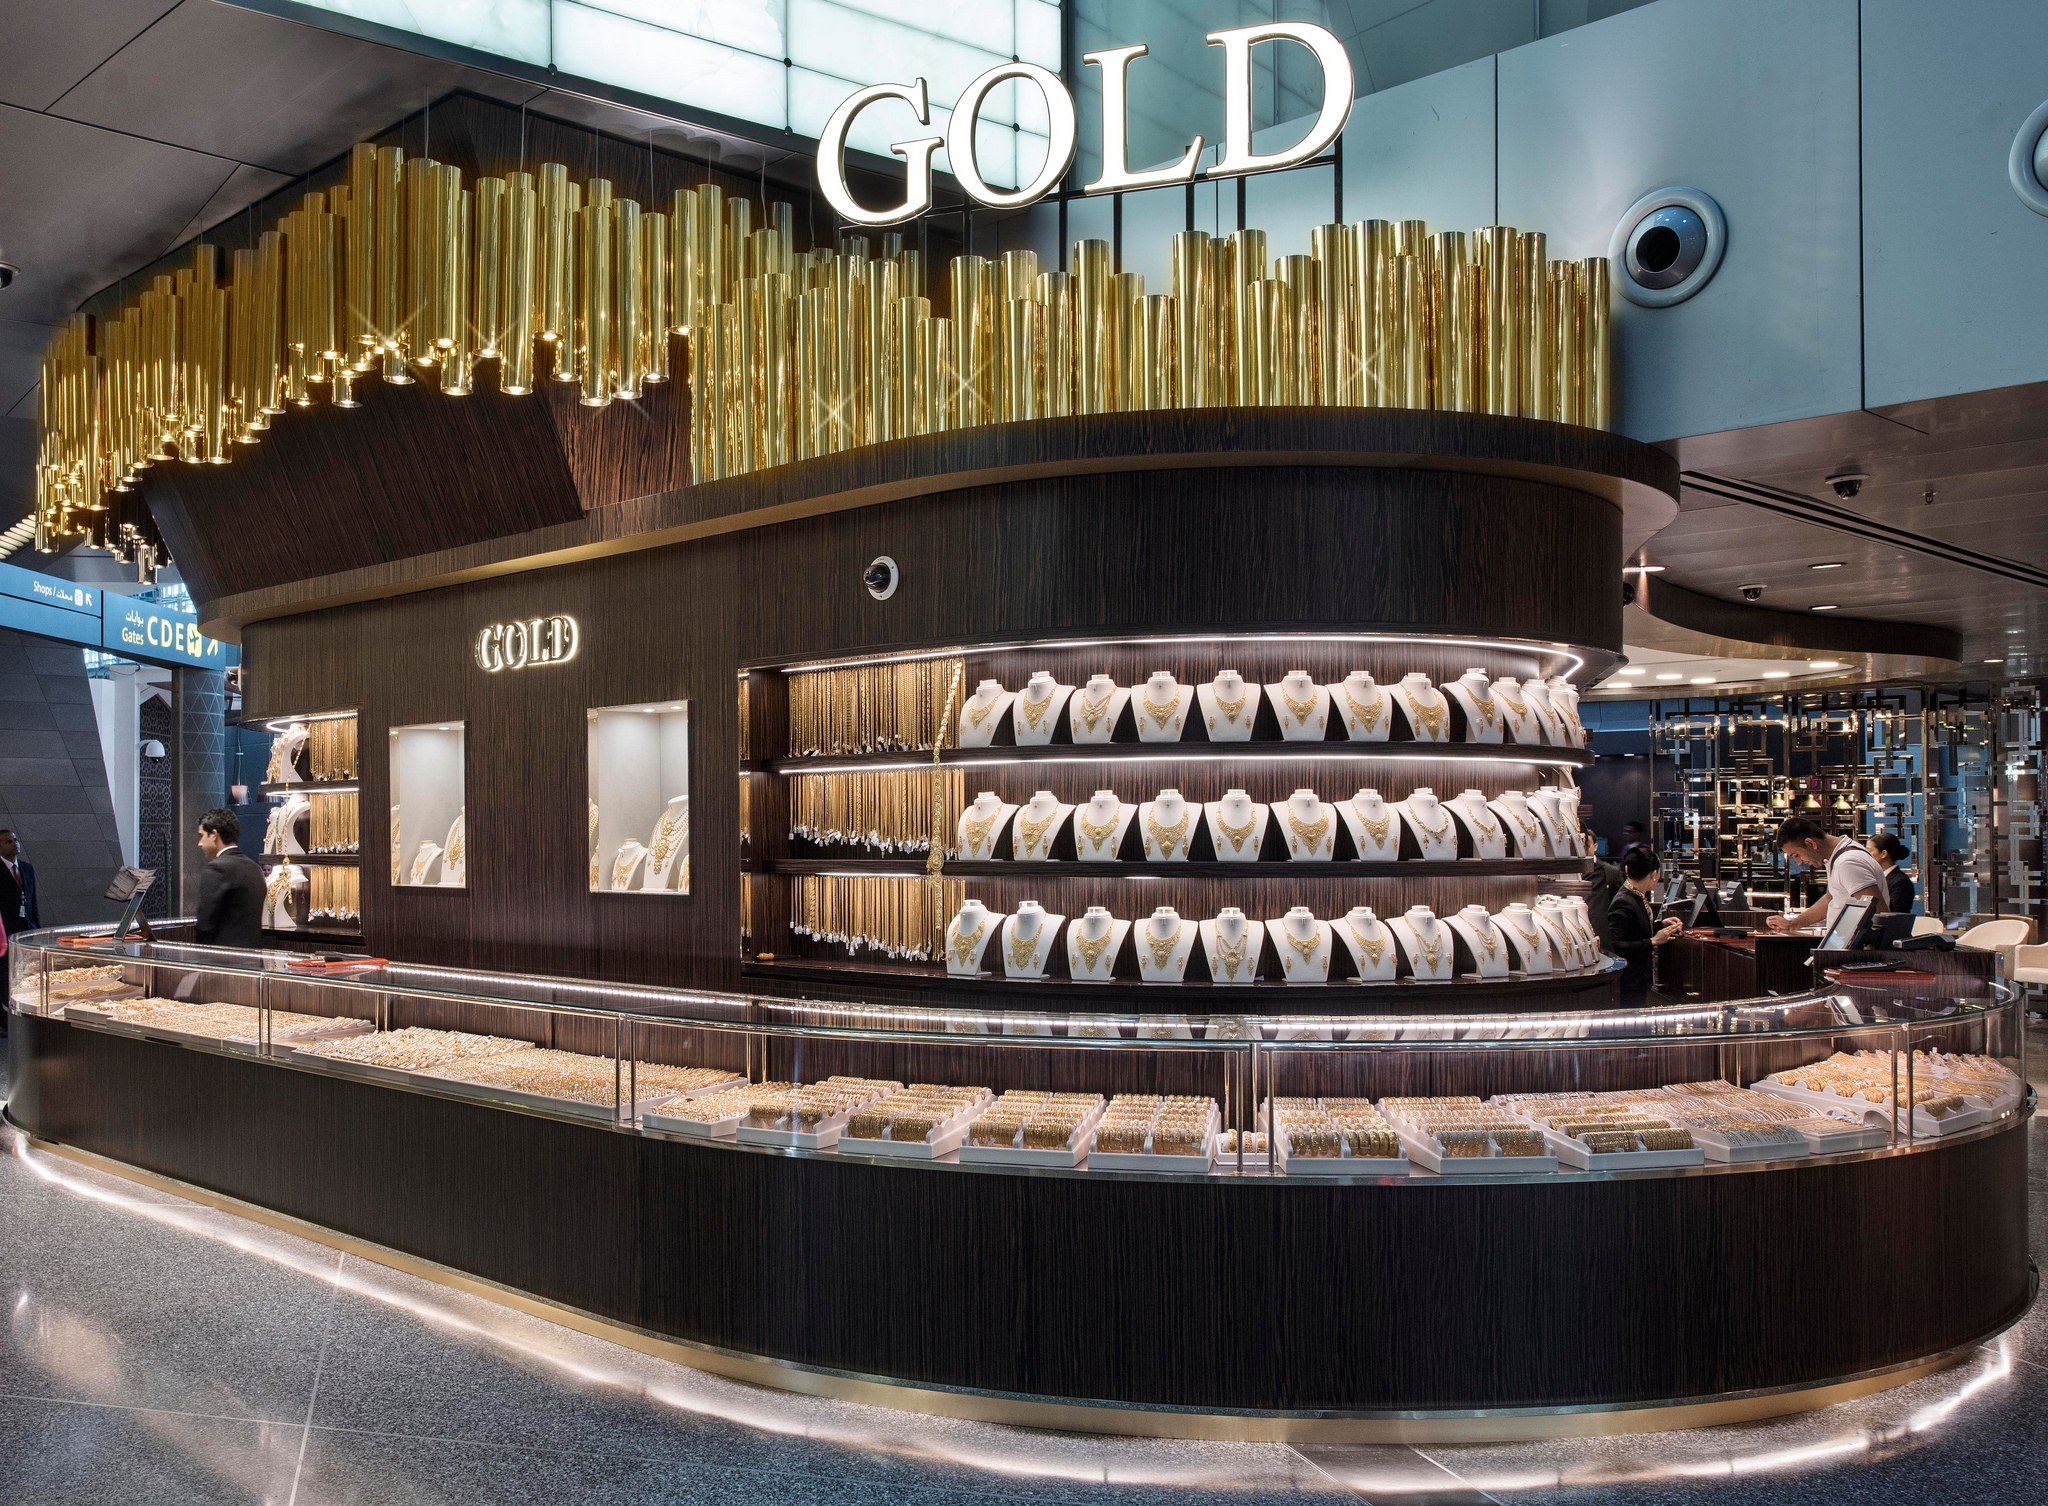 Qatar Duty Free has opened its third Gold shop at Hamad International Airport (HIA) in Doha. The new shop showcases more than 15,000 pieces of exquisite traditional and modern jewellery made from the finest gold and diamonds.